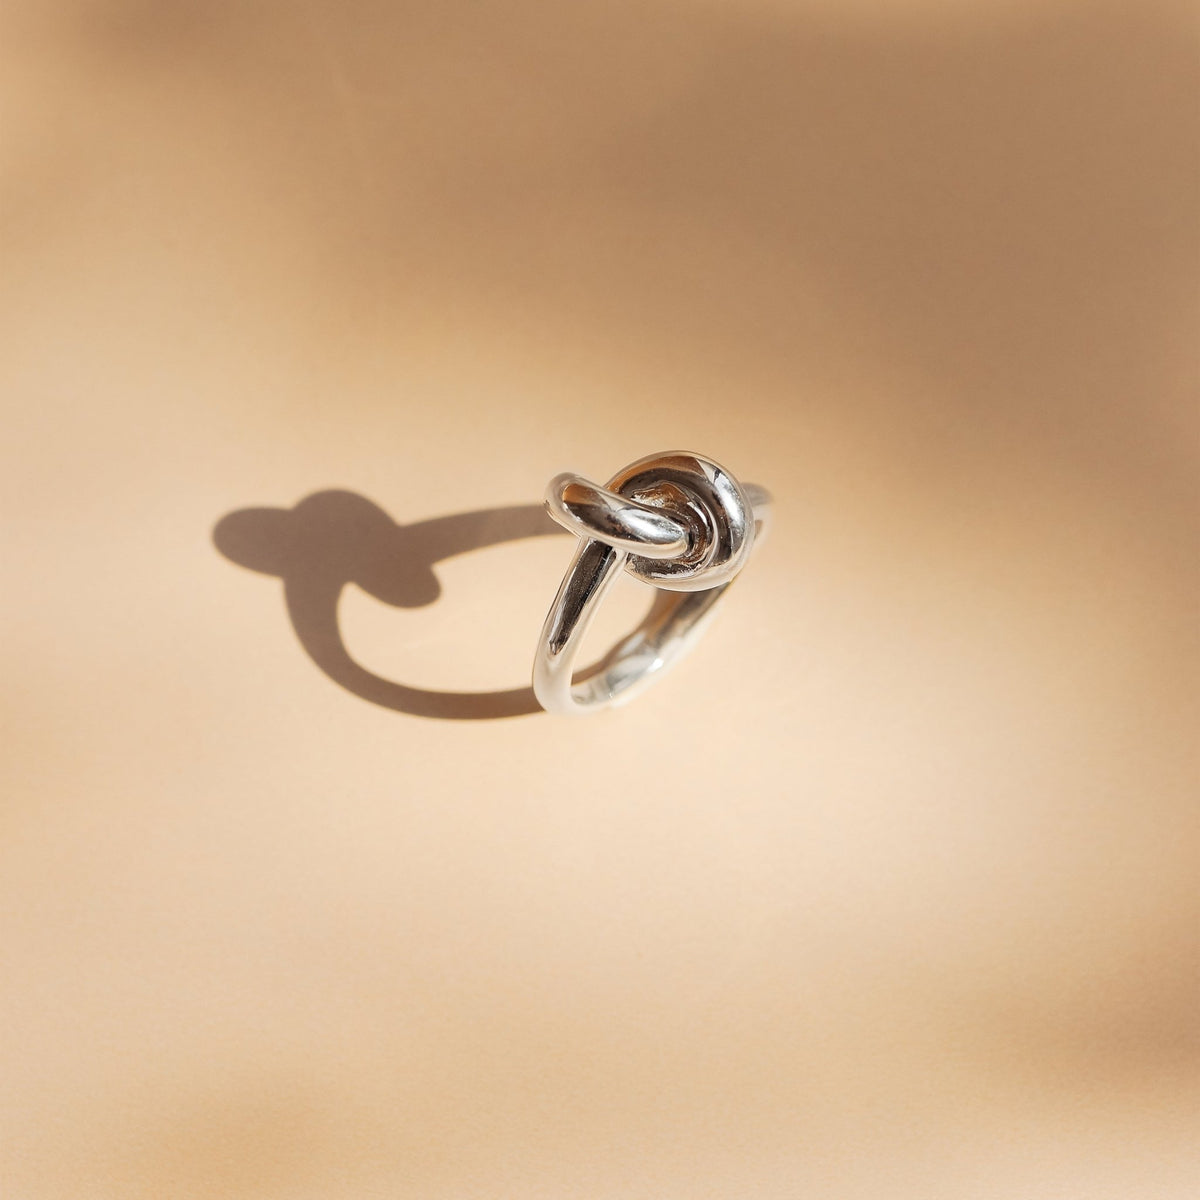 POISE KNOT COCKTAIL RING - SILVER - SO PRETTY CARA COTTER